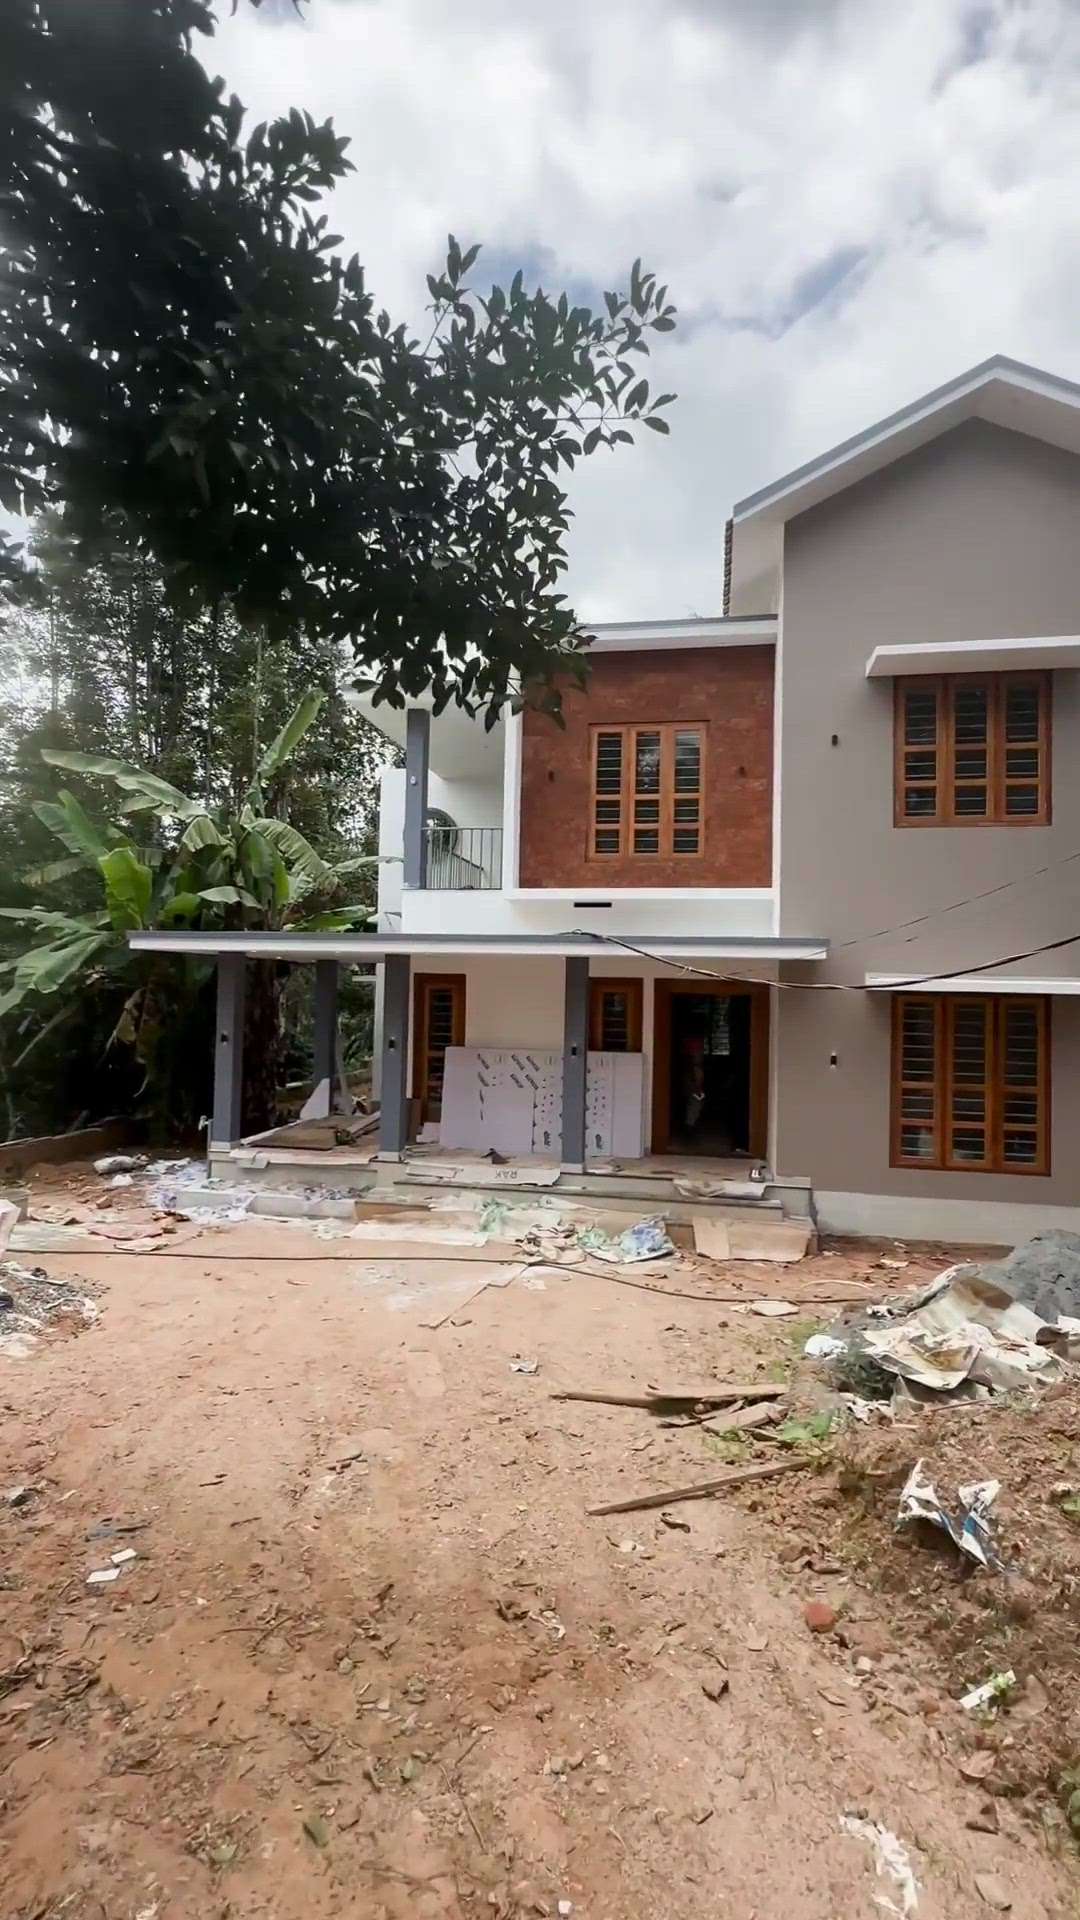 Shaping up...!

Project : Sunilettante veed
Client : Mr. Sunil Kumar & Family
Area : 1728 sqft / 4 BHK
Type : Residence
Location : Ambalavayal, Wayanad.

#akamarchitects #concepthome #architecture #keralahousedesign #contemporaryhome #architecturephotography #renovation #keralaarchitecture #keralahomes #wayanad